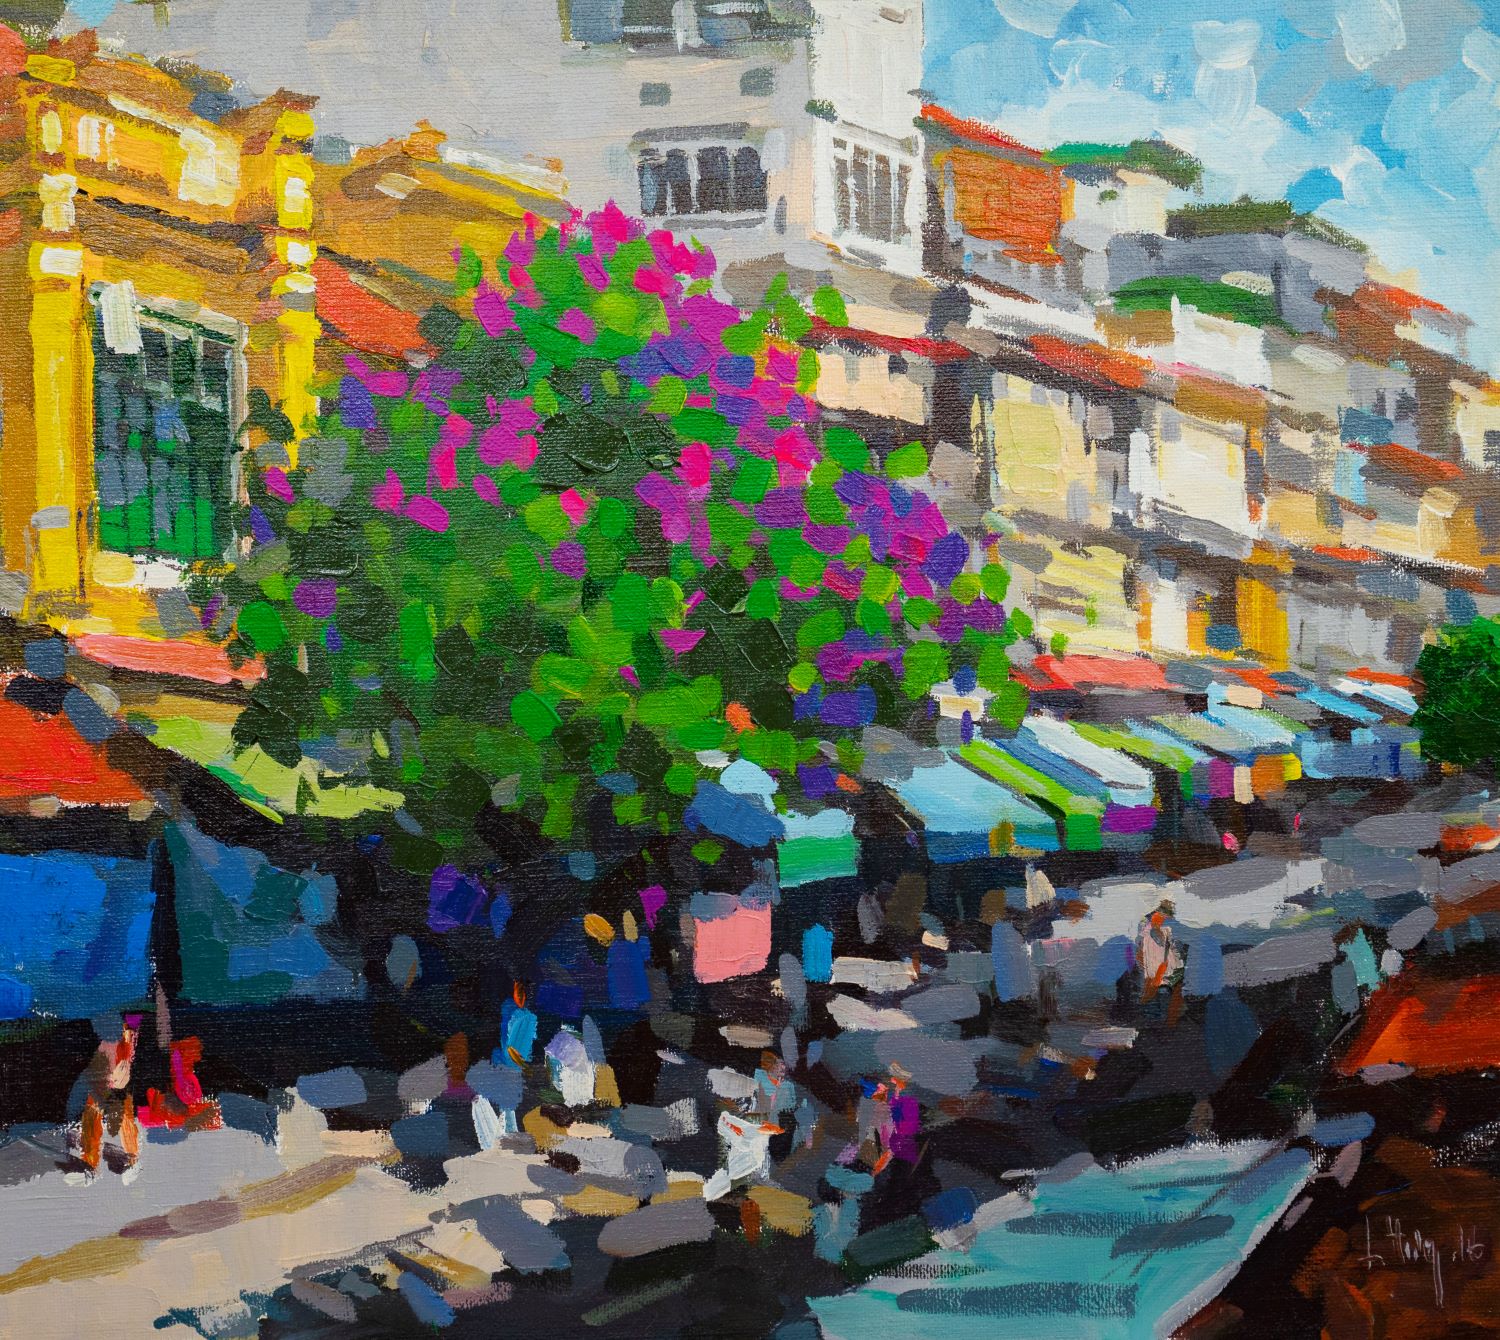 Hang Ngang Street - Vietnamese Oil Painting by Artist Le Huong